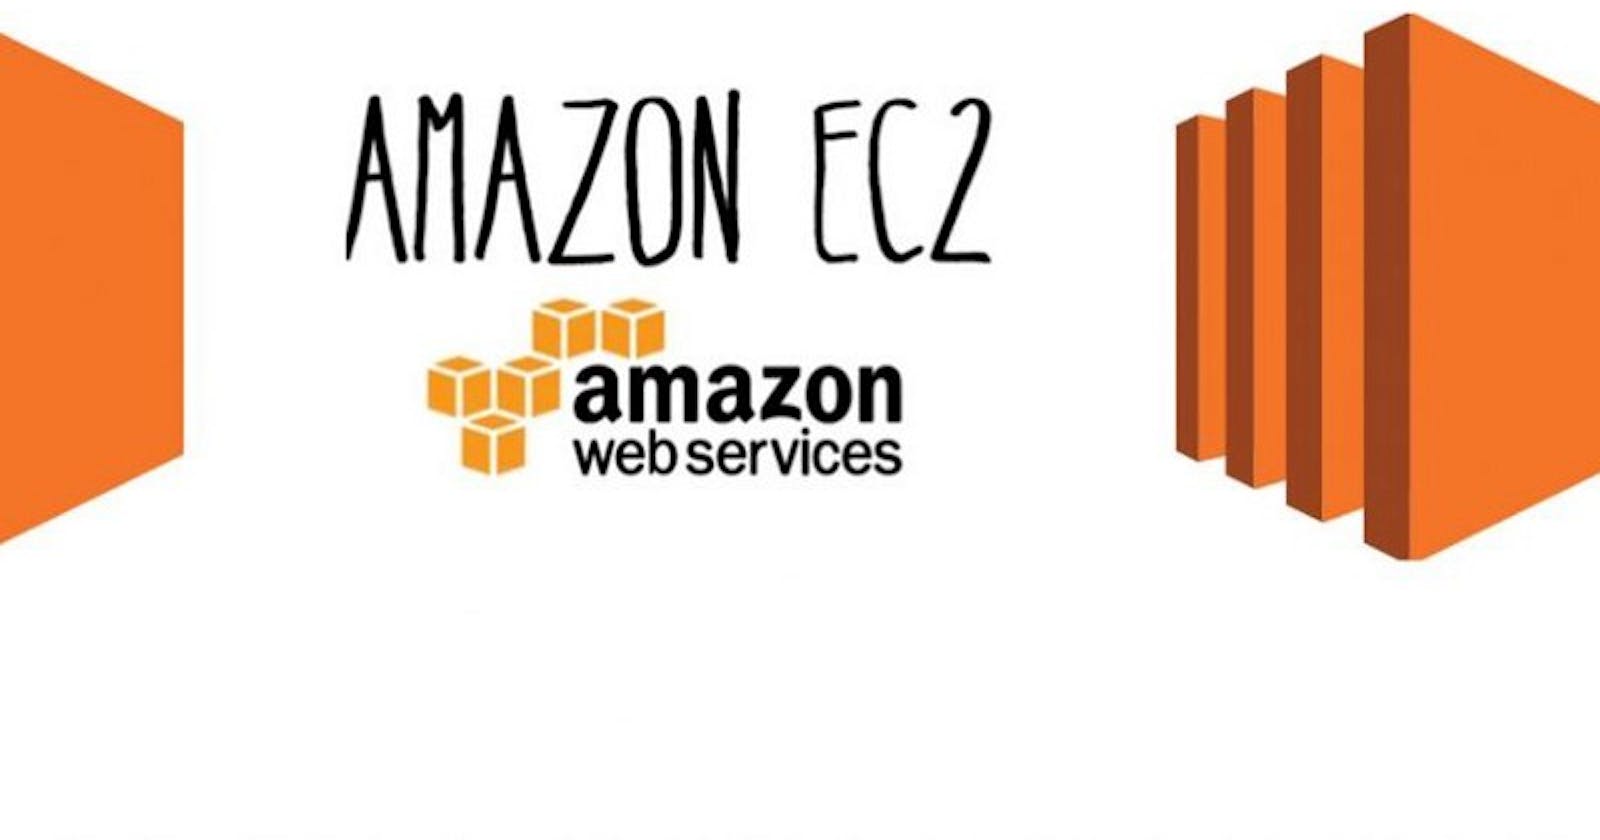 Setting up an apache website in seconds on AWS Linux AMI